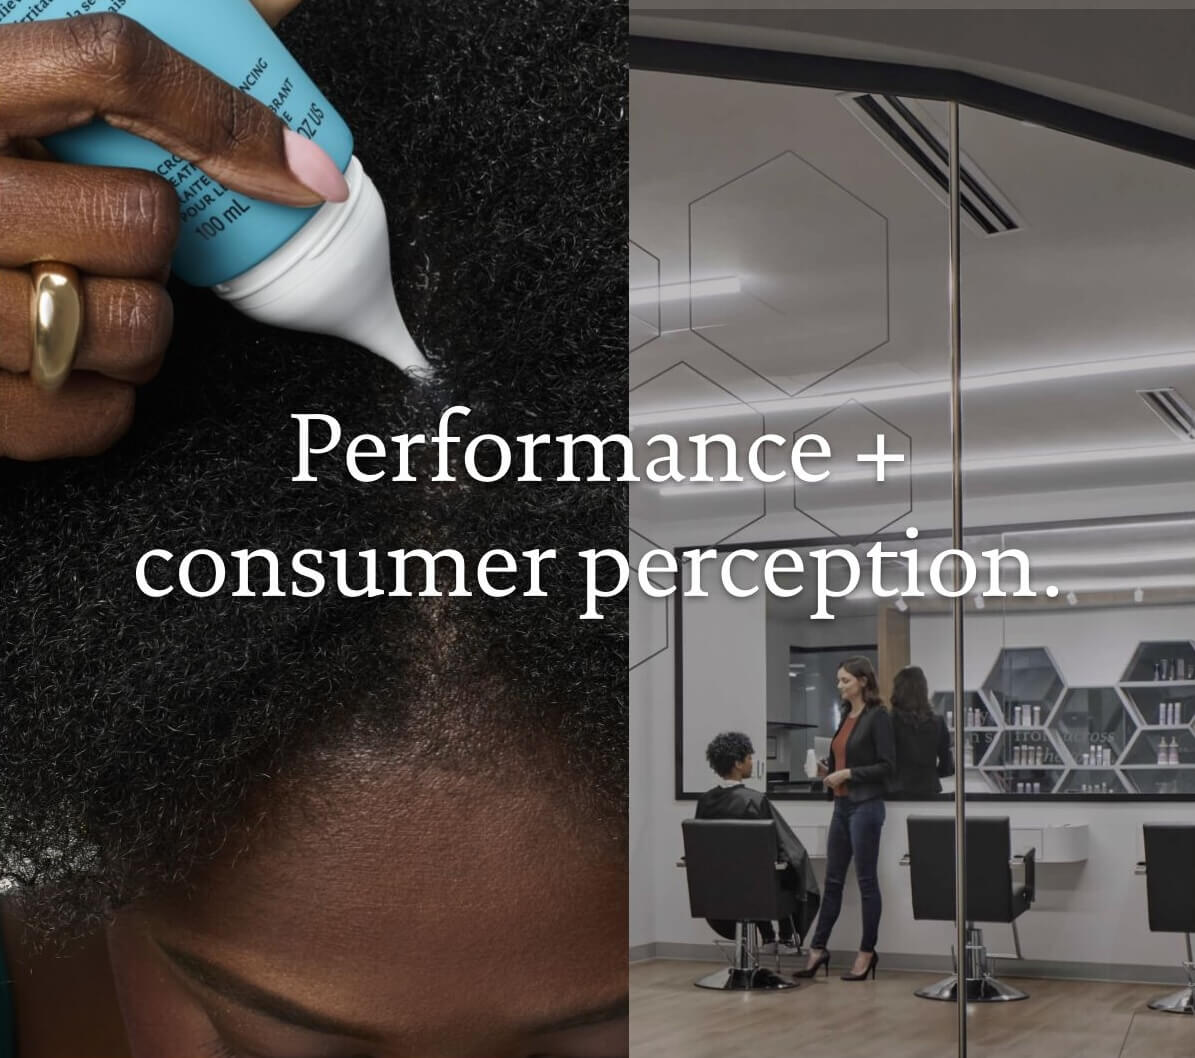 Performance and consumer perception